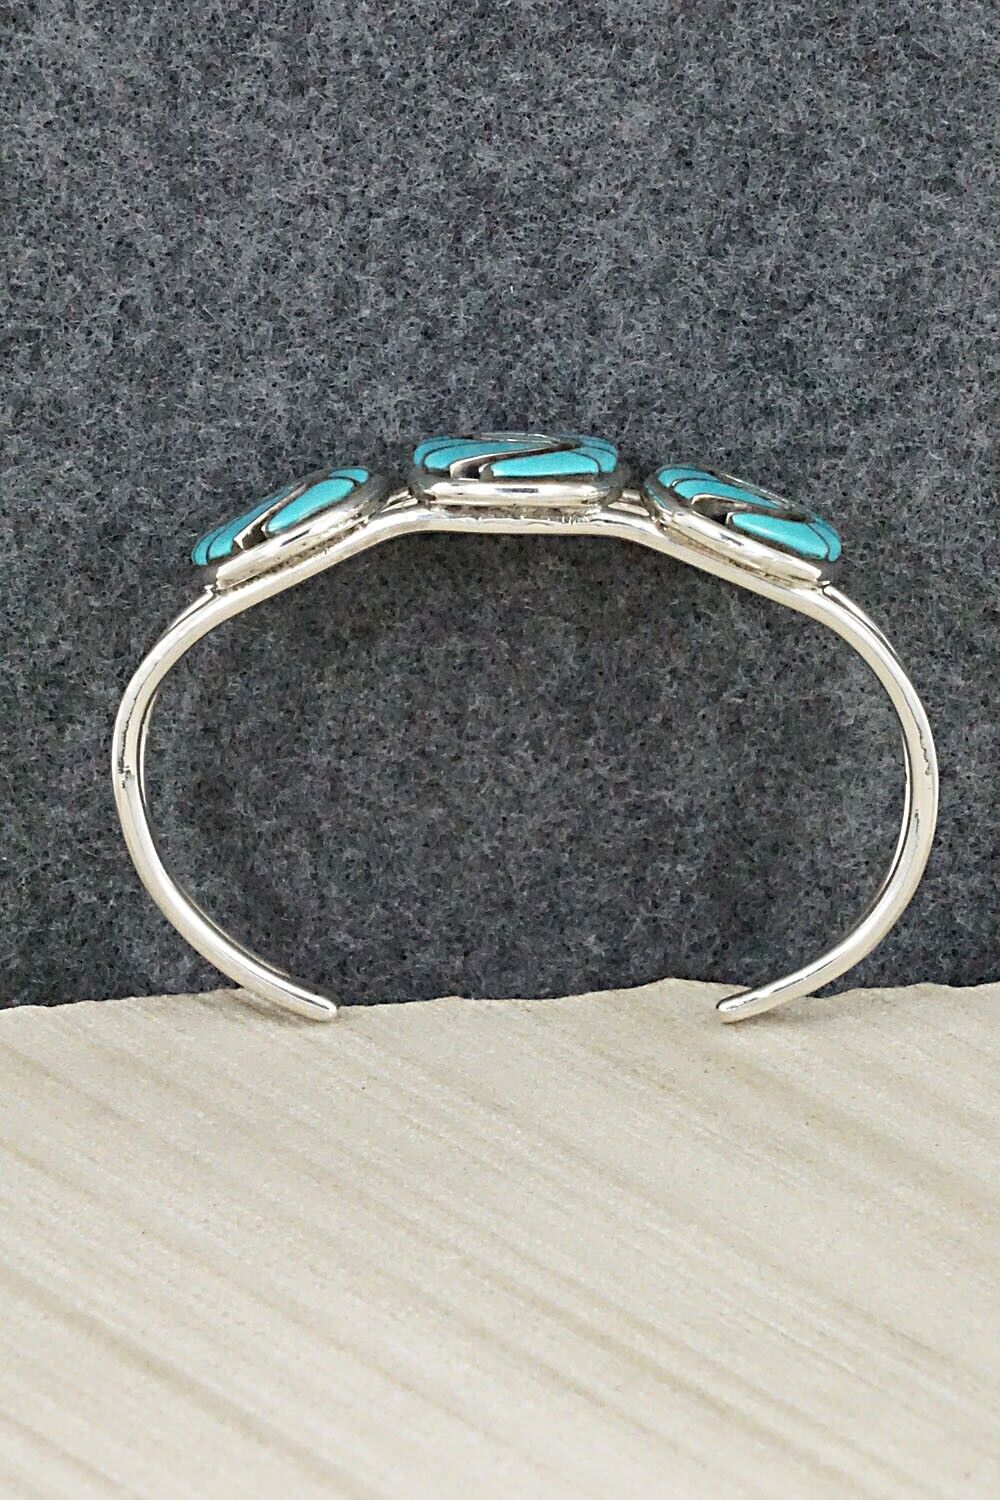 Turquoise & Sterling Silver Bracelet and Ring Set - Amy Wesley